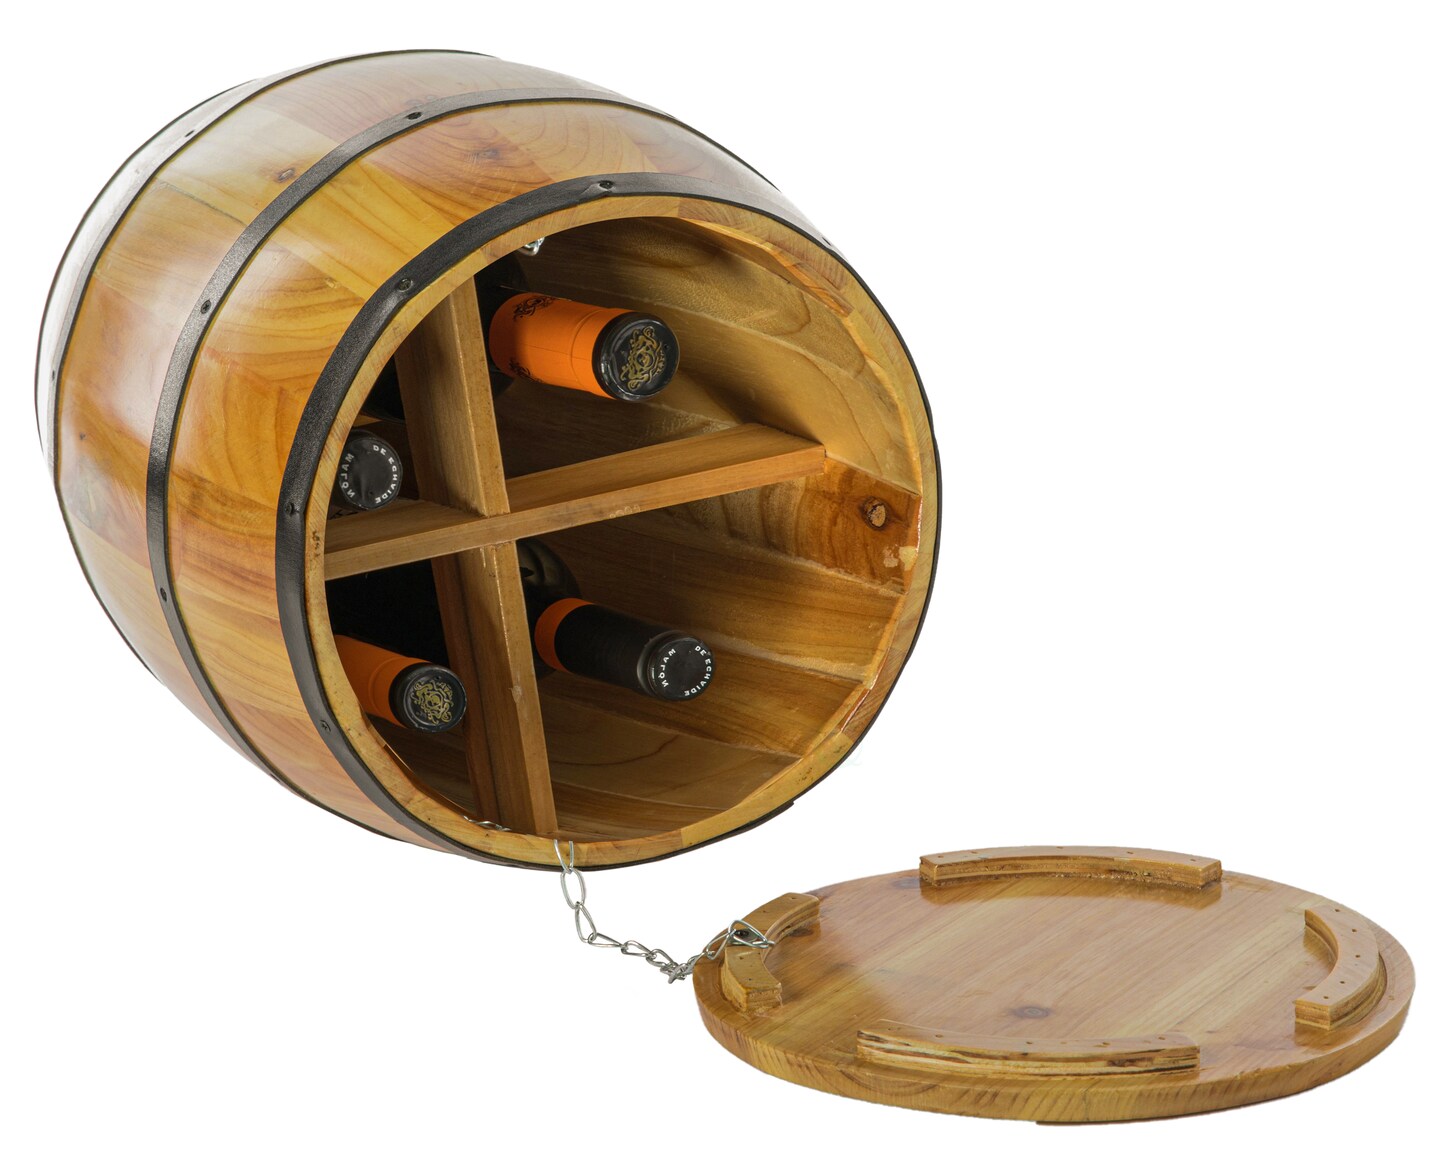 Wine Barrel 4 Sectional Crate With Removable Head Lid